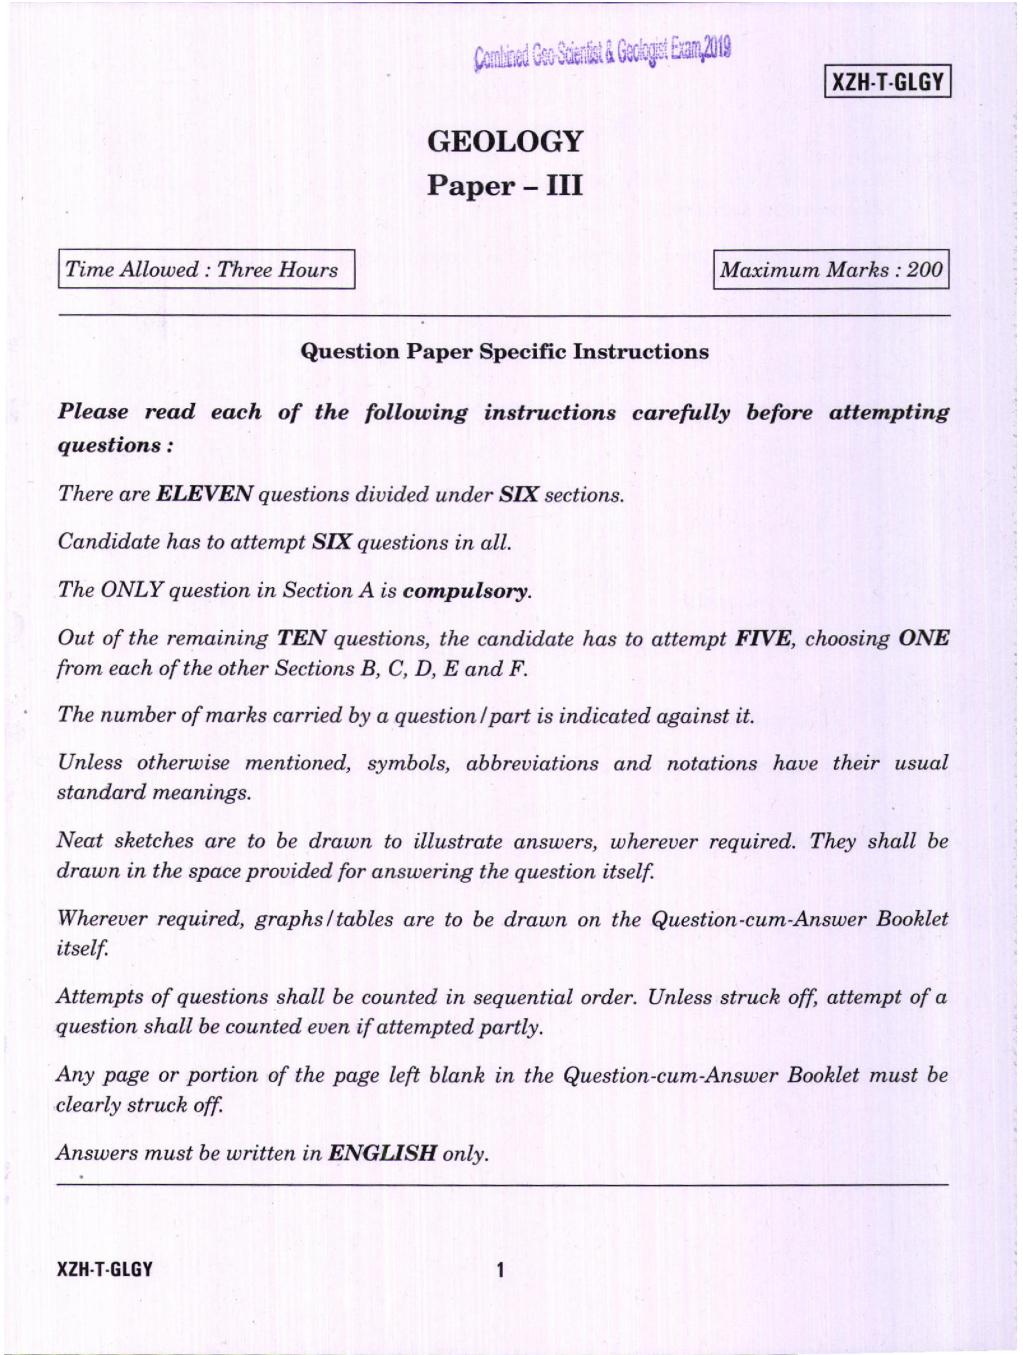 UPSC CGGE 2019 Question Paper Geology Paper III - Page 1